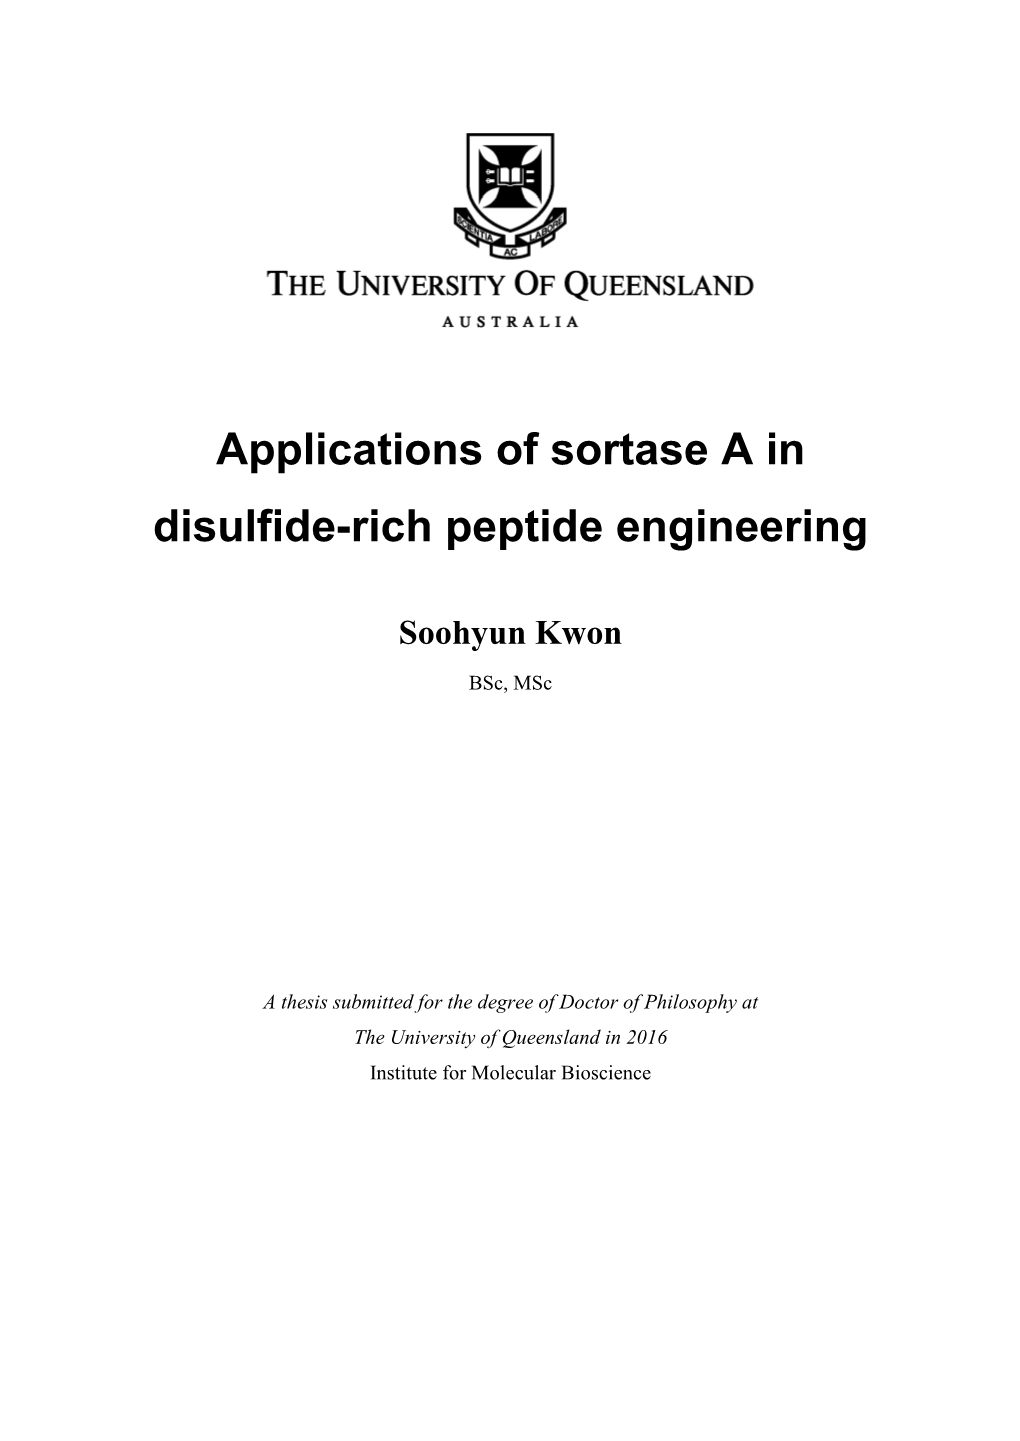 Applications of Sortase a in Disulfide-Rich Peptide Engineering